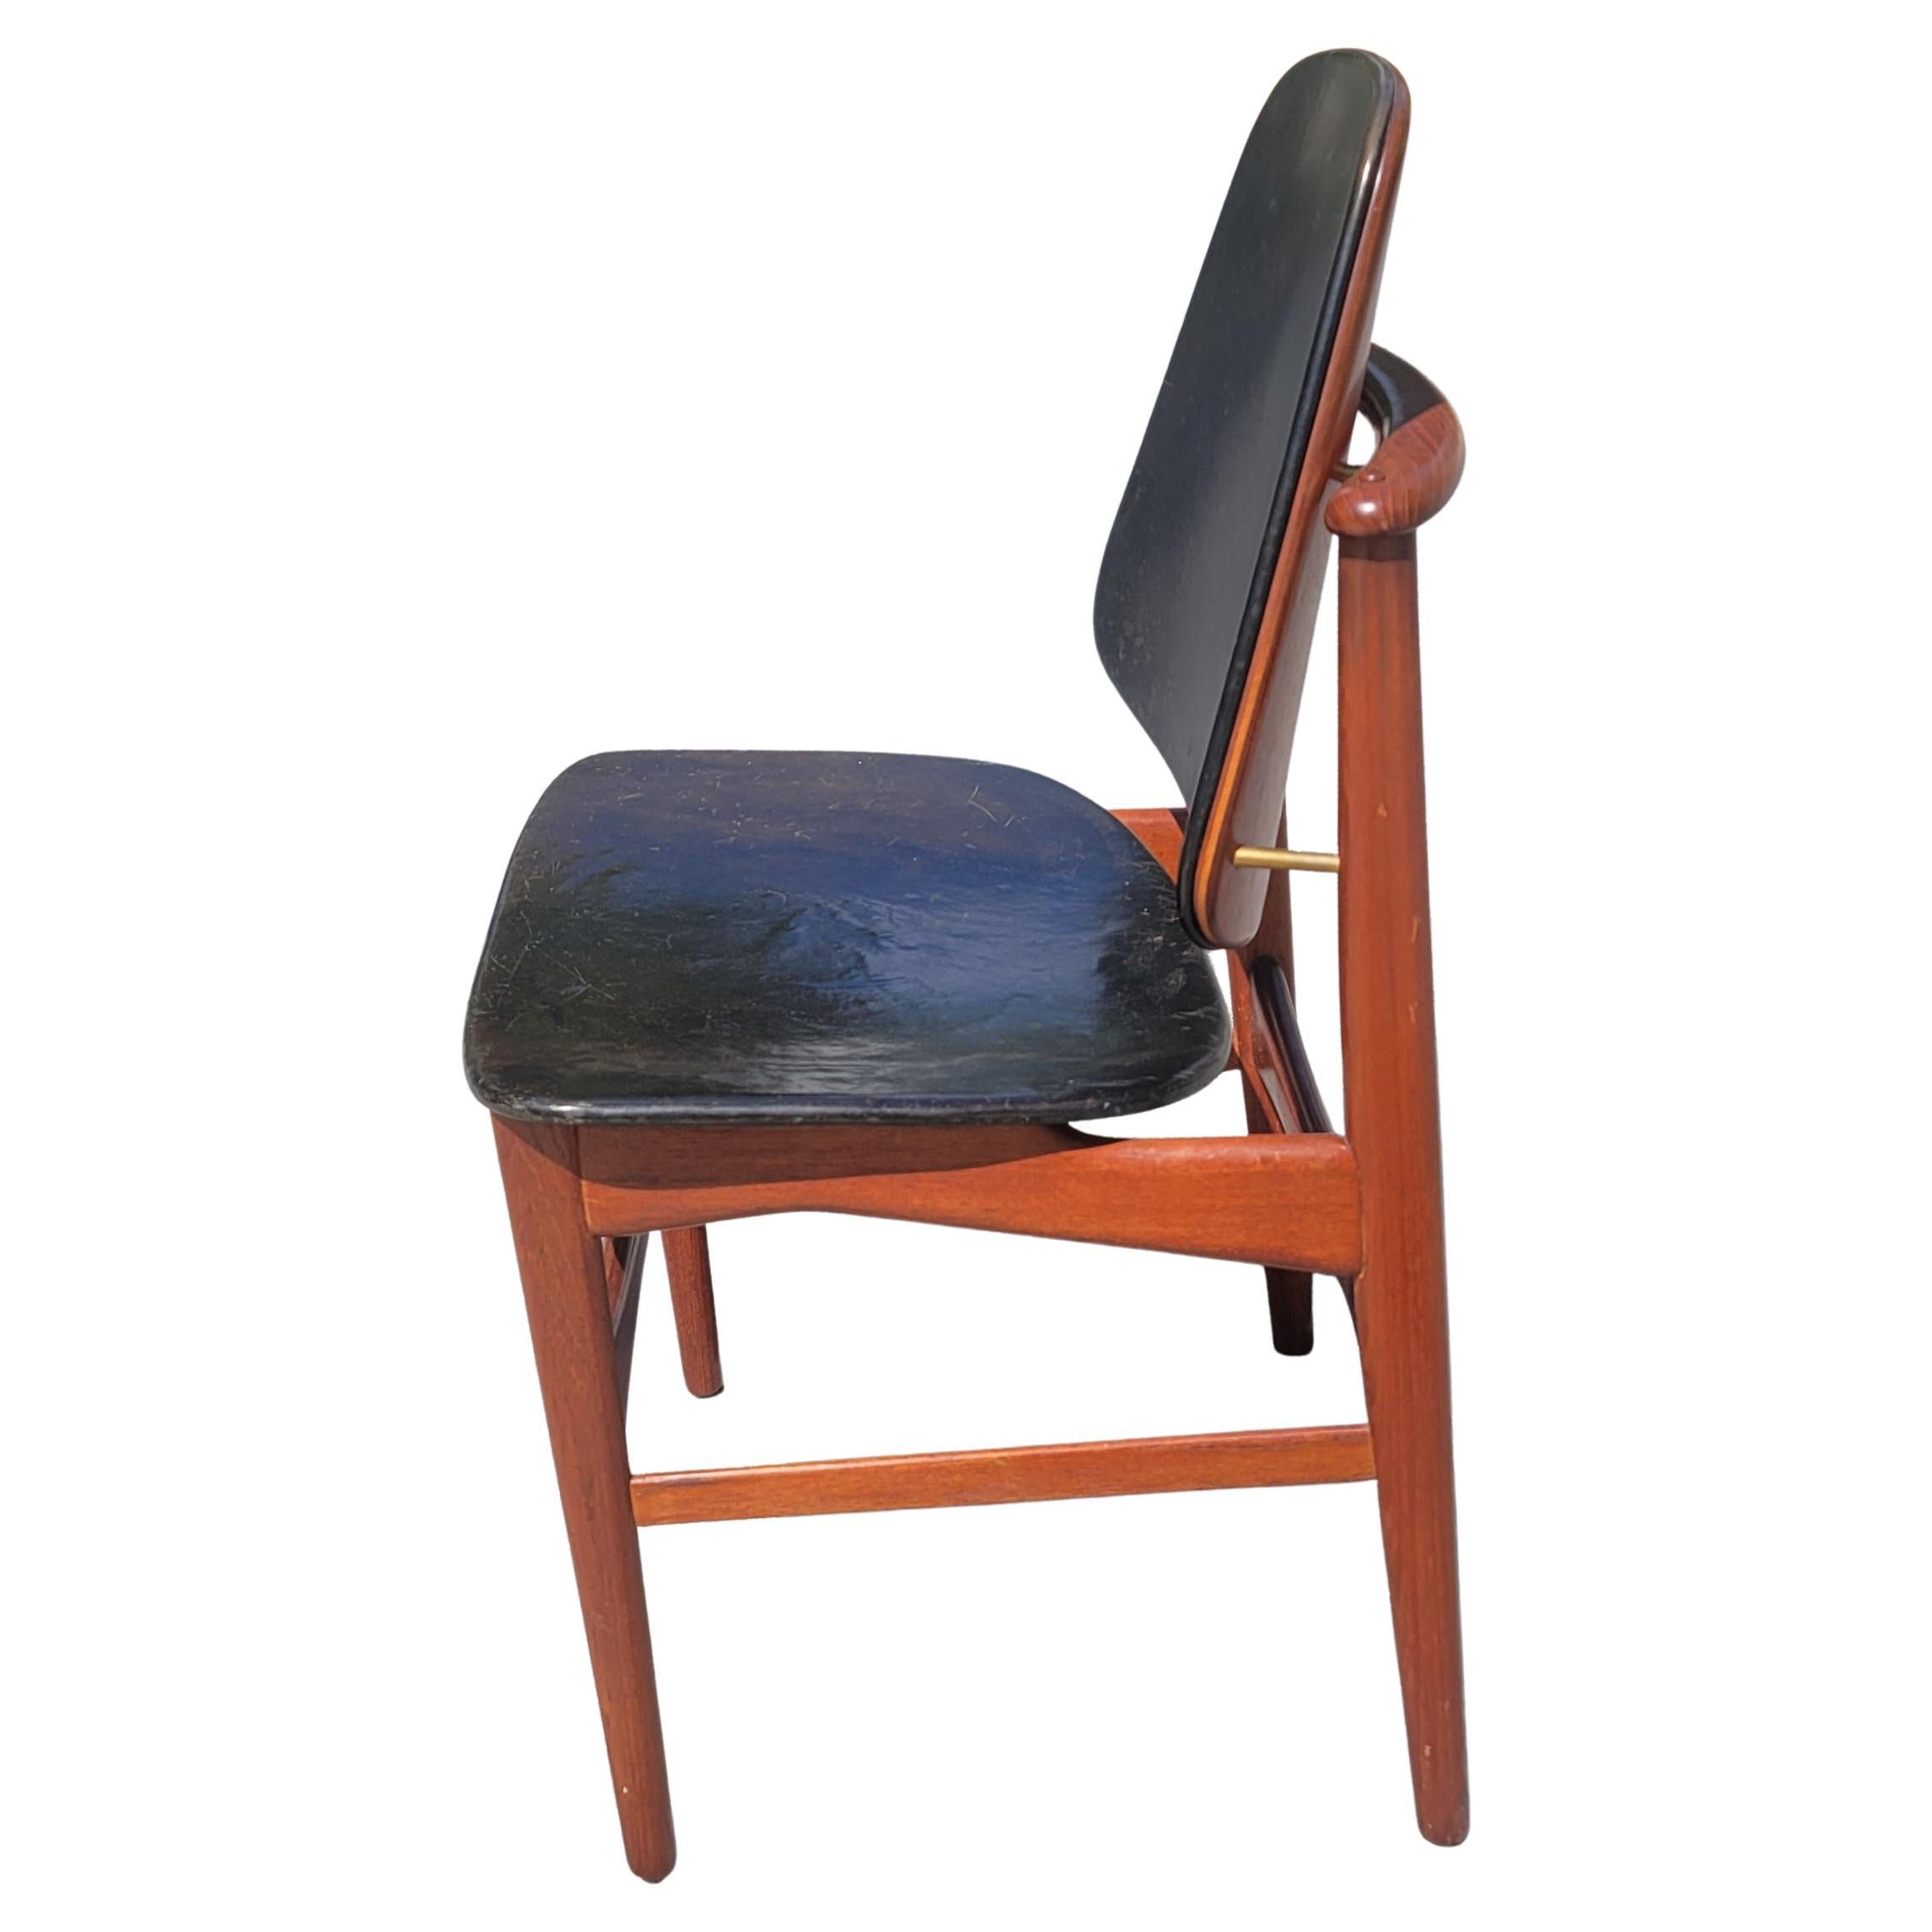 A 1950s Danish modern chair in Solid Teak chair designed by Arne Vodder for France & Daverkosen. Great condition with nice patina on black leather back and seat, as well as on solid teak wood frame. Measures 19.5